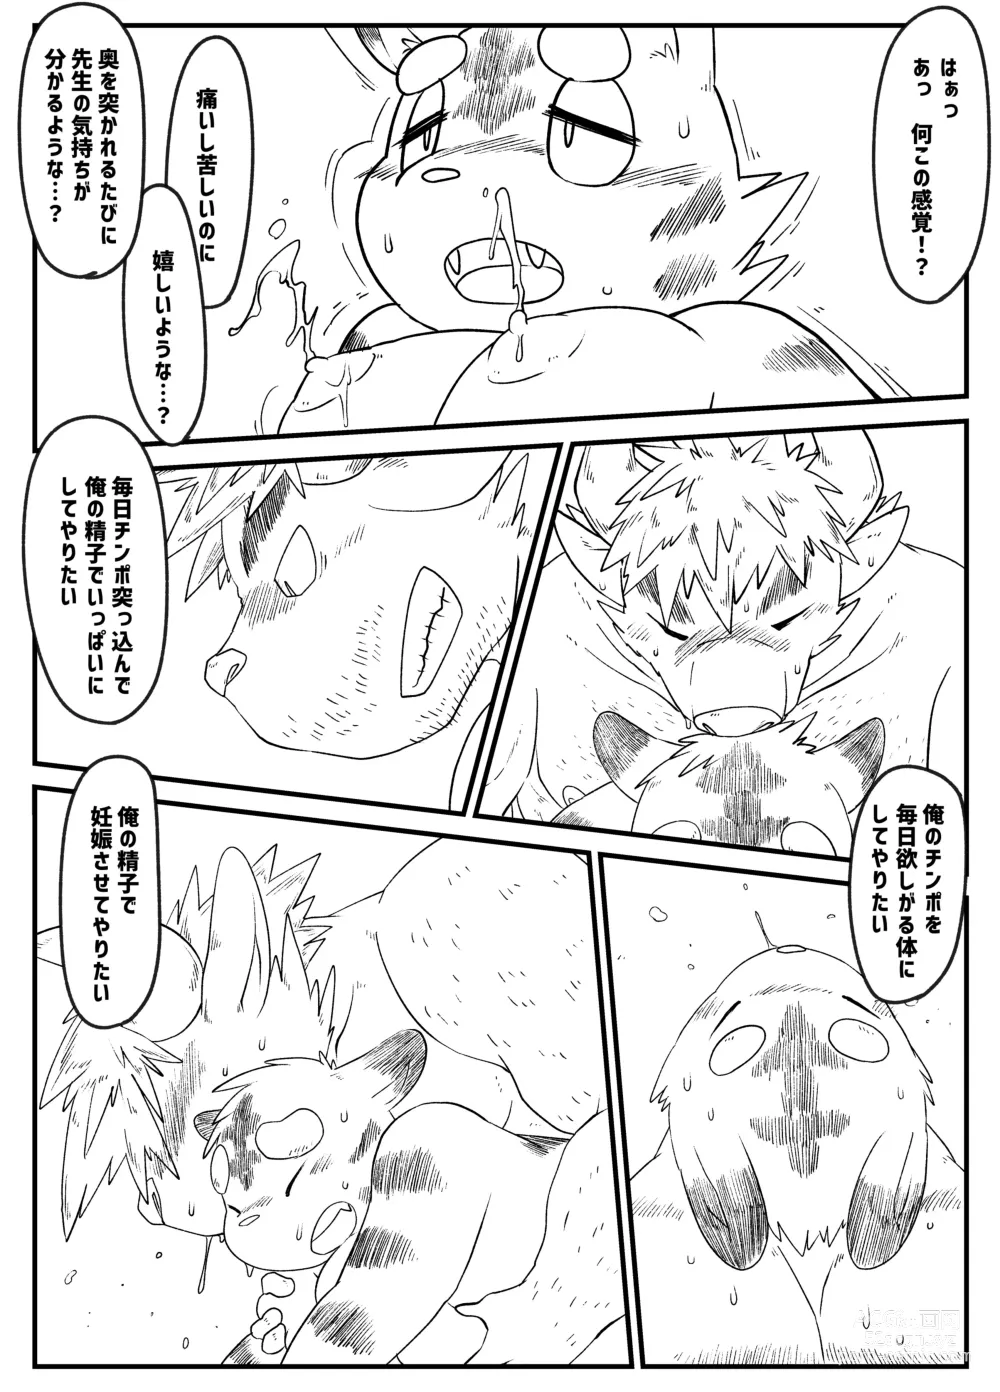 Page 11 of doujinshi Muscular Bull Teacher & Chubby Tiger Student 5